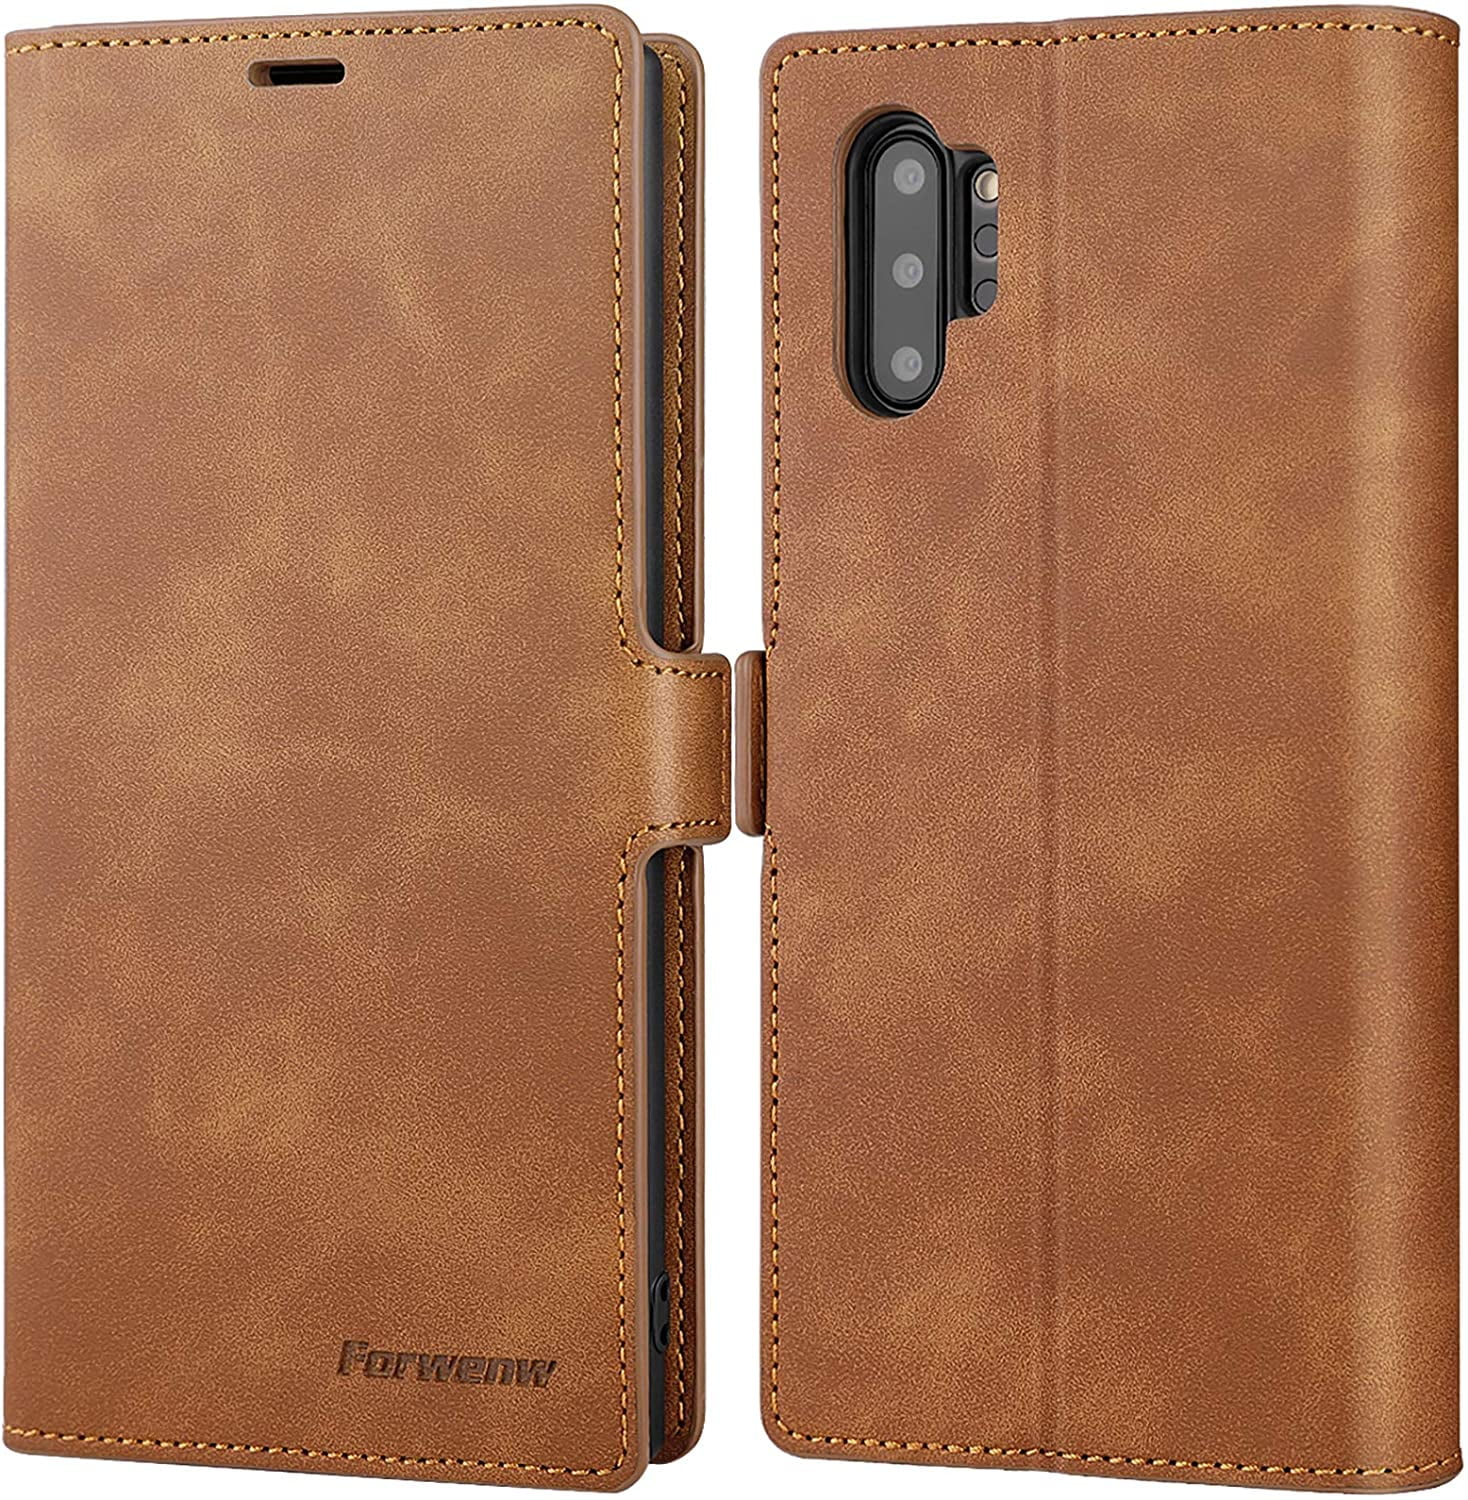 Samsung Galaxy Note10 Flip Case Cover for Samsung Galaxy Note10 Leather Kickstand Premium Business Wallet case Card Holders with Free Waterproof-Bag 